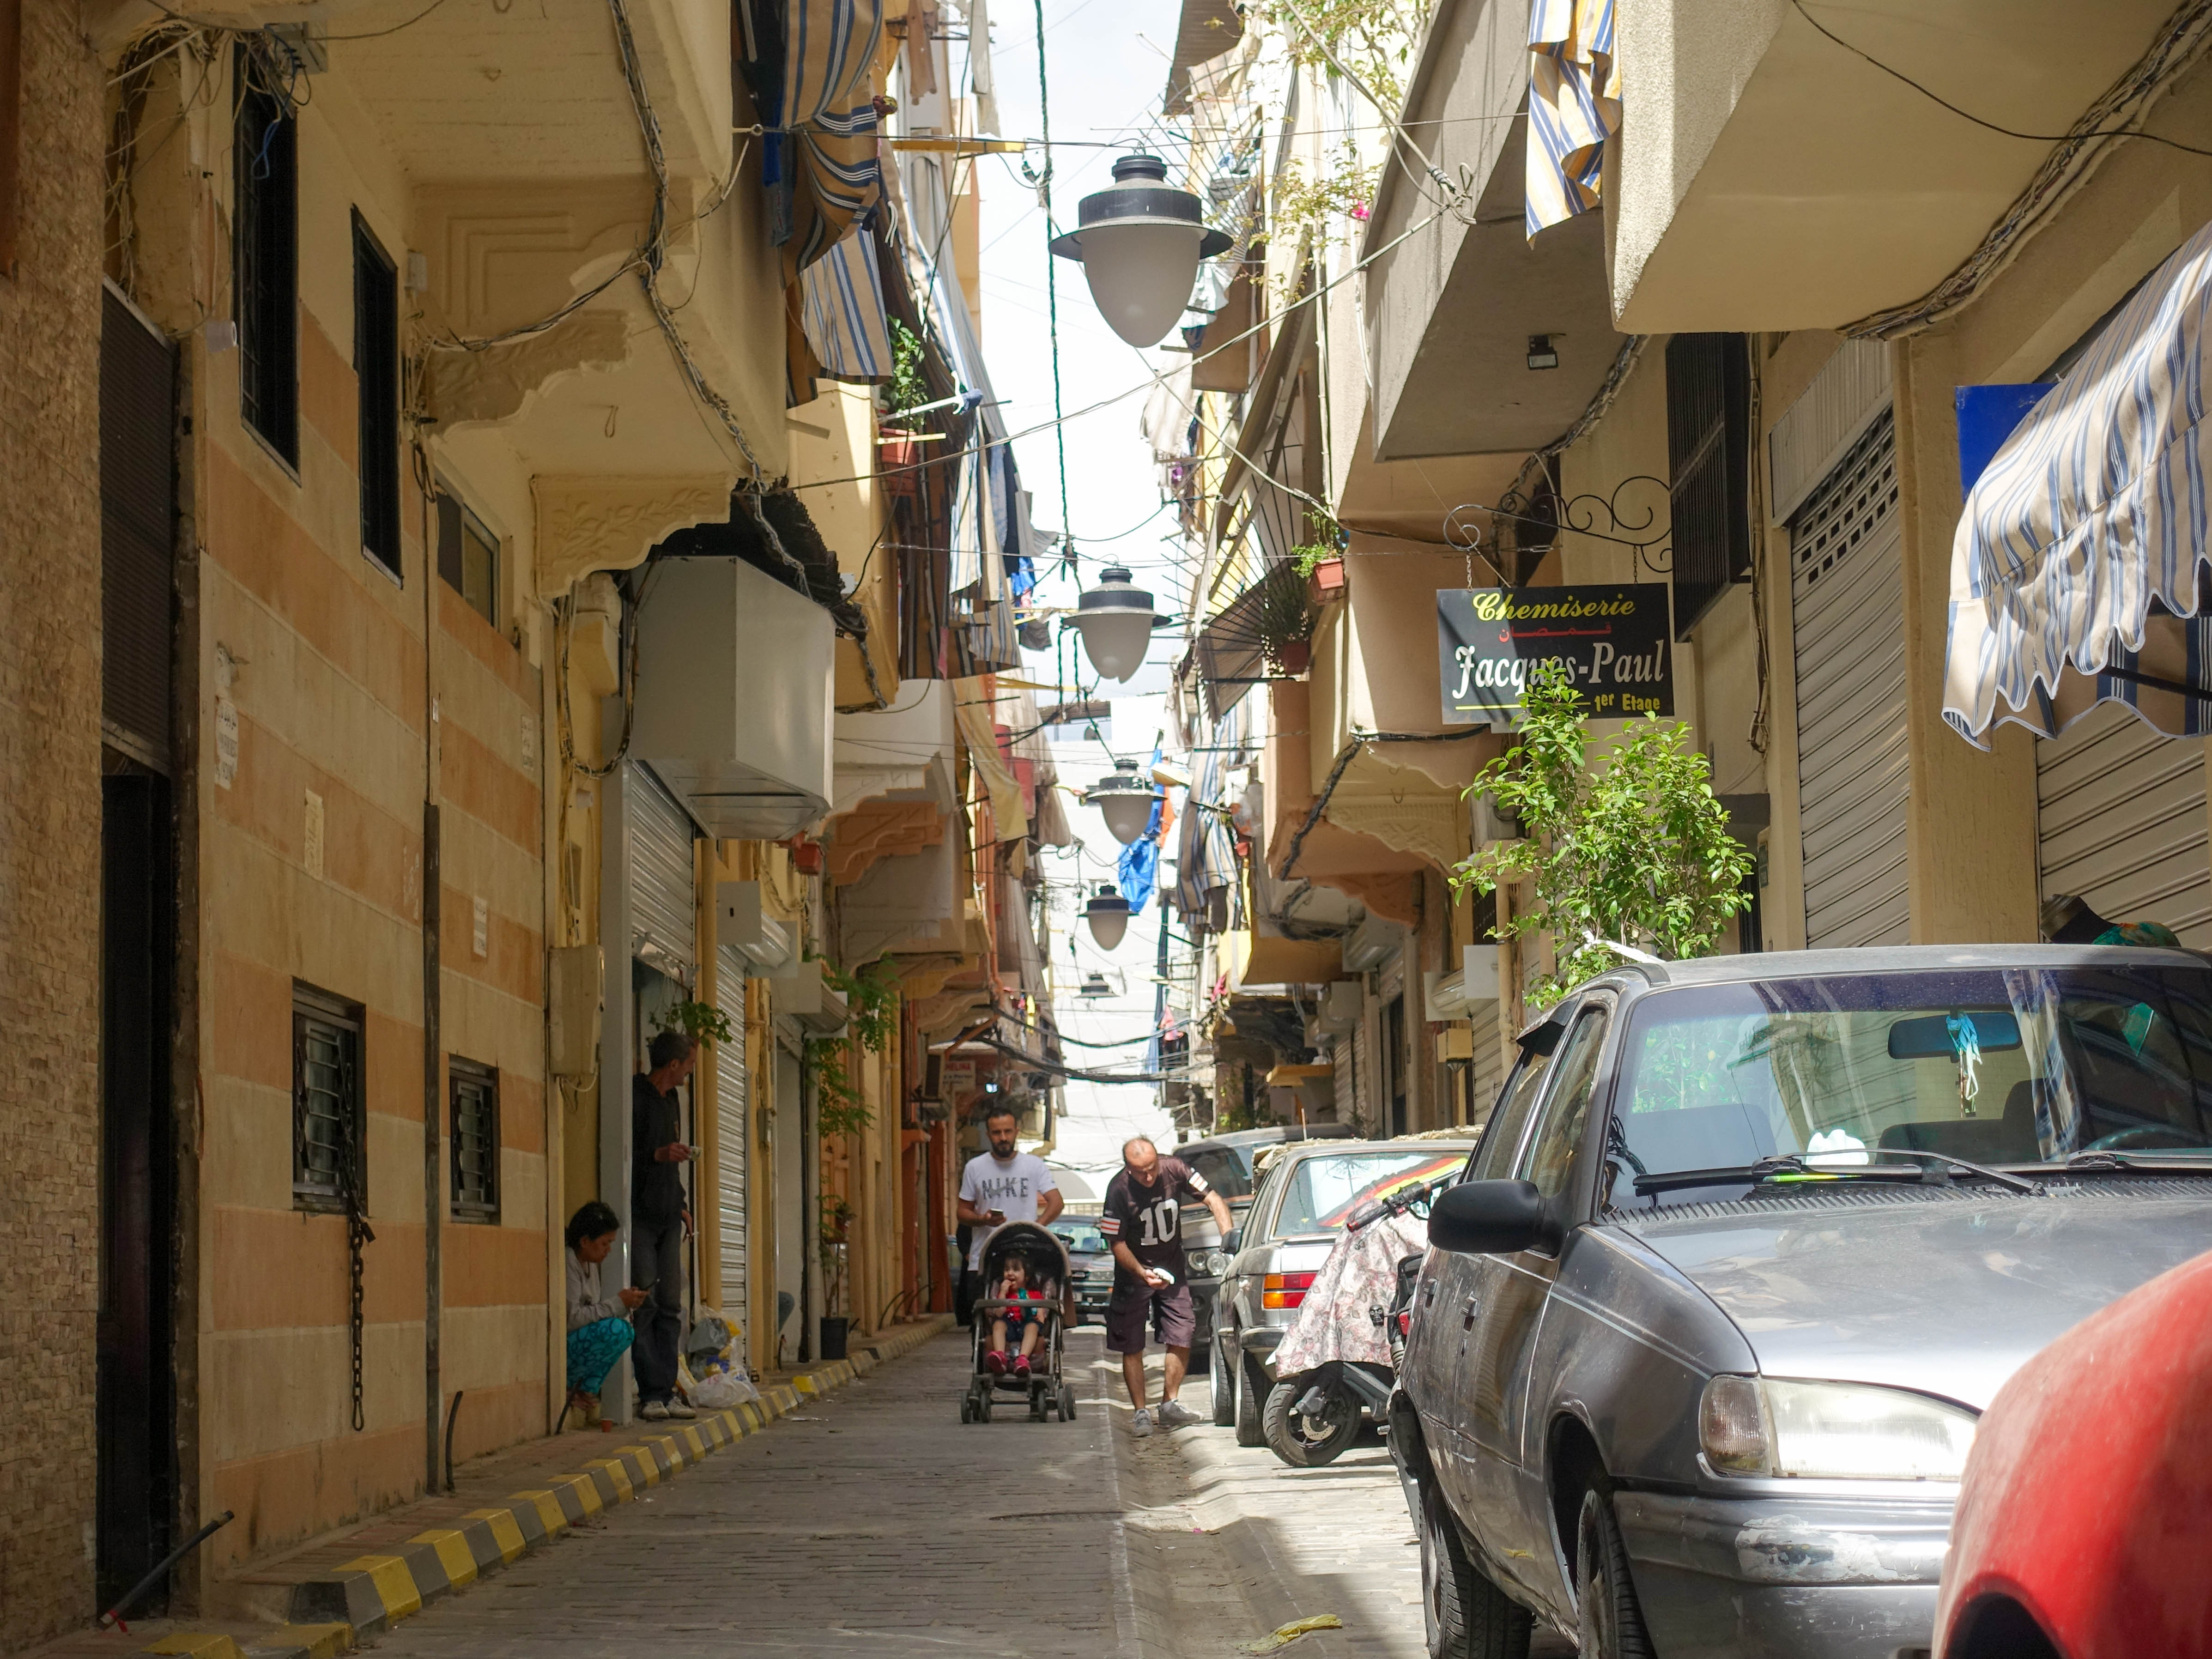 Street-level view of 1 of the 5 alleyways in Maraach, Bourj Hammoud that underwent rehabilitation through funding from the Government of Japan and Polish Aid.” UN-Habitat Lebanon, 2022